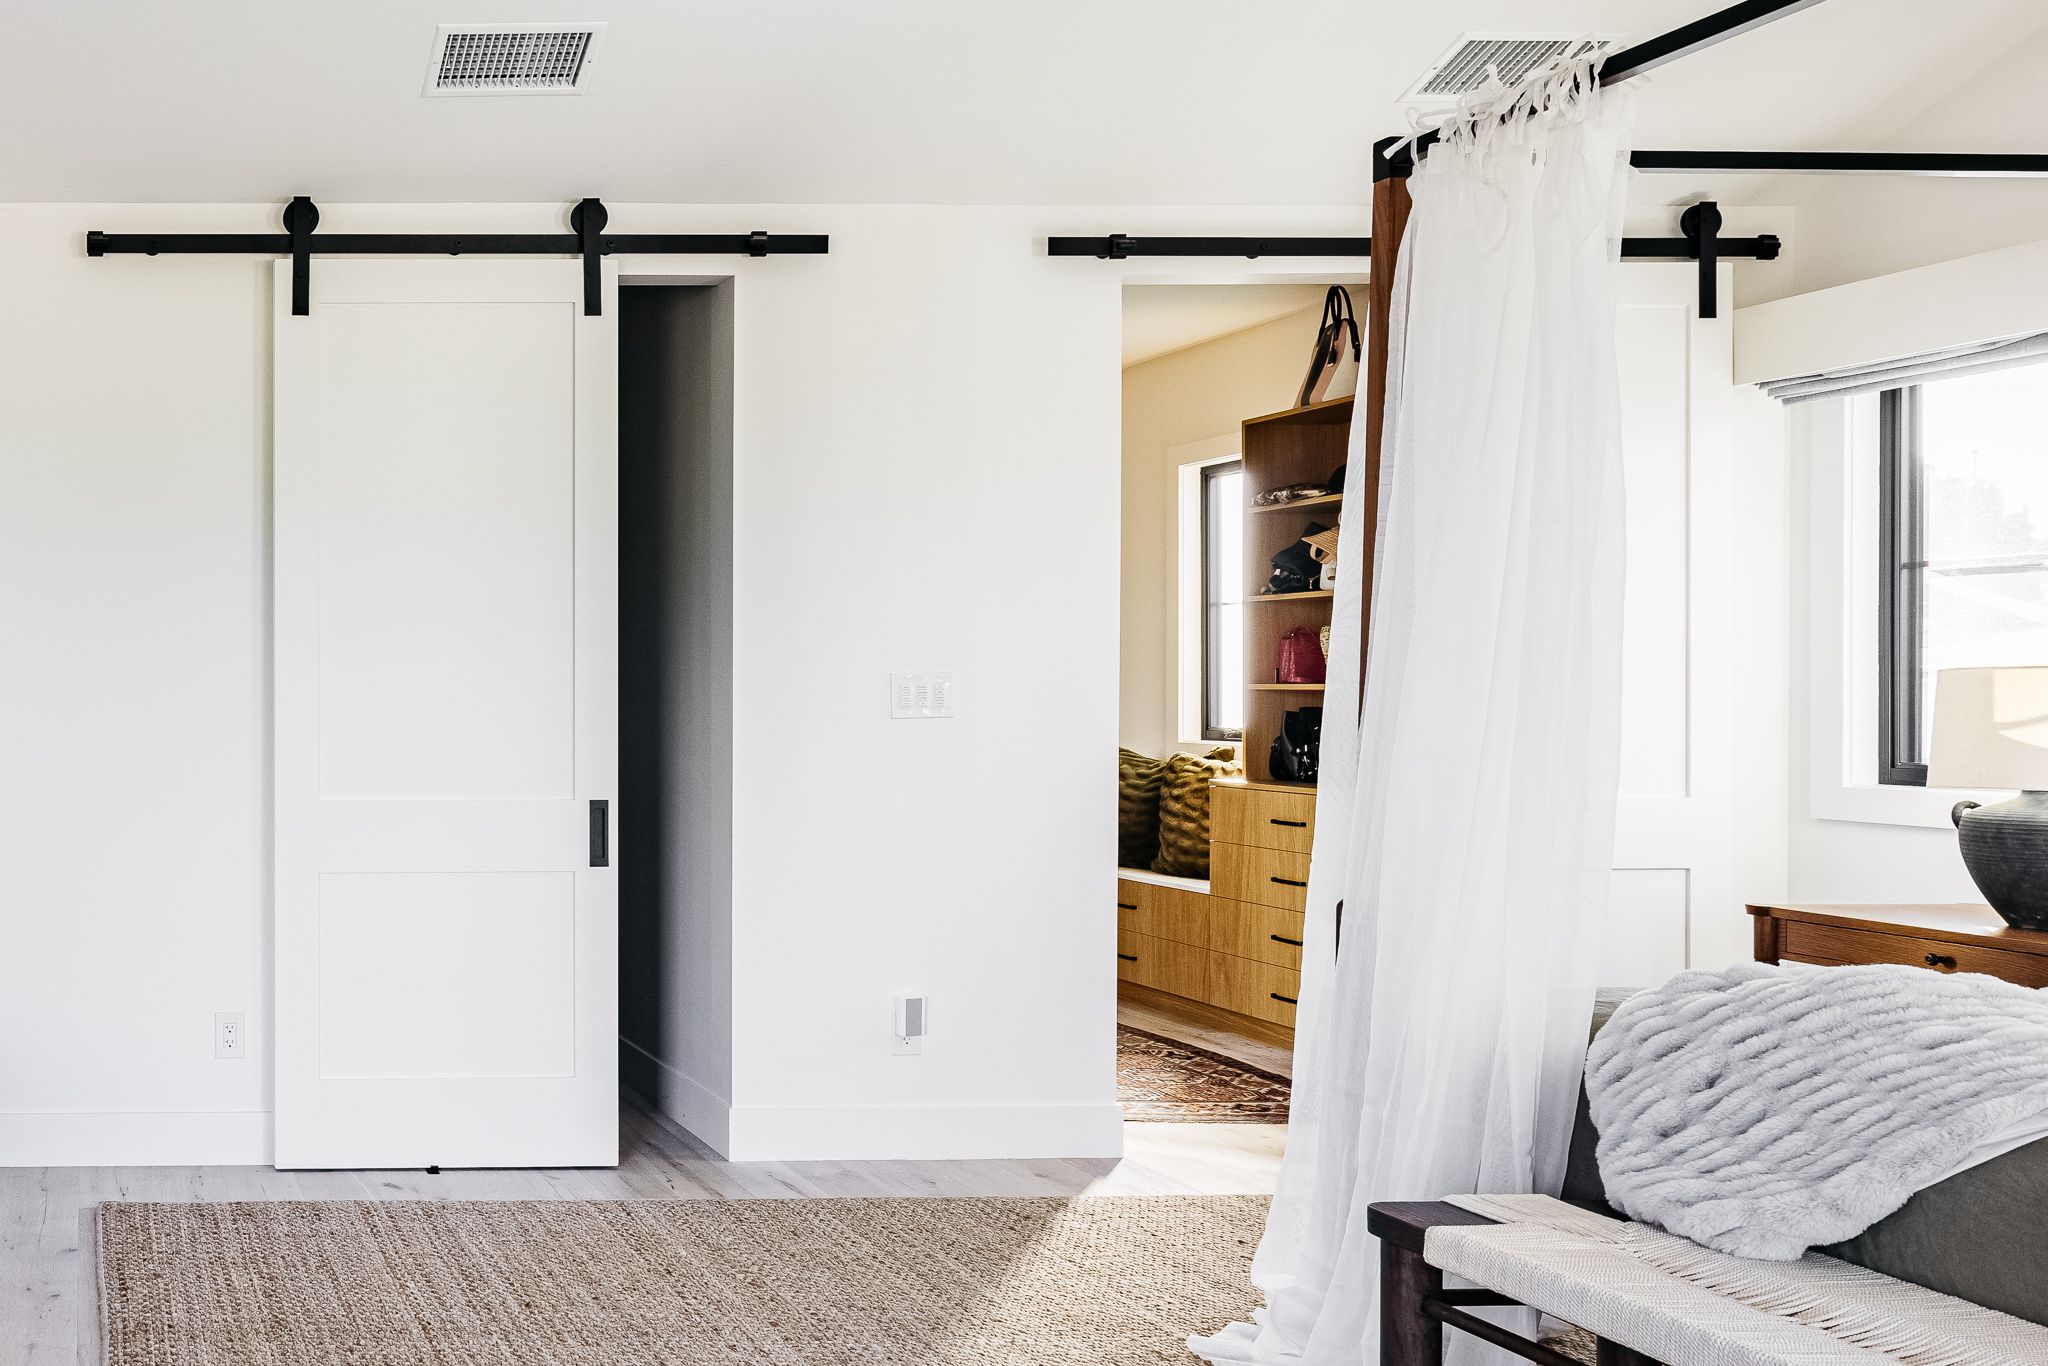 11 Pretty Ways to Decorate With Barn Doors